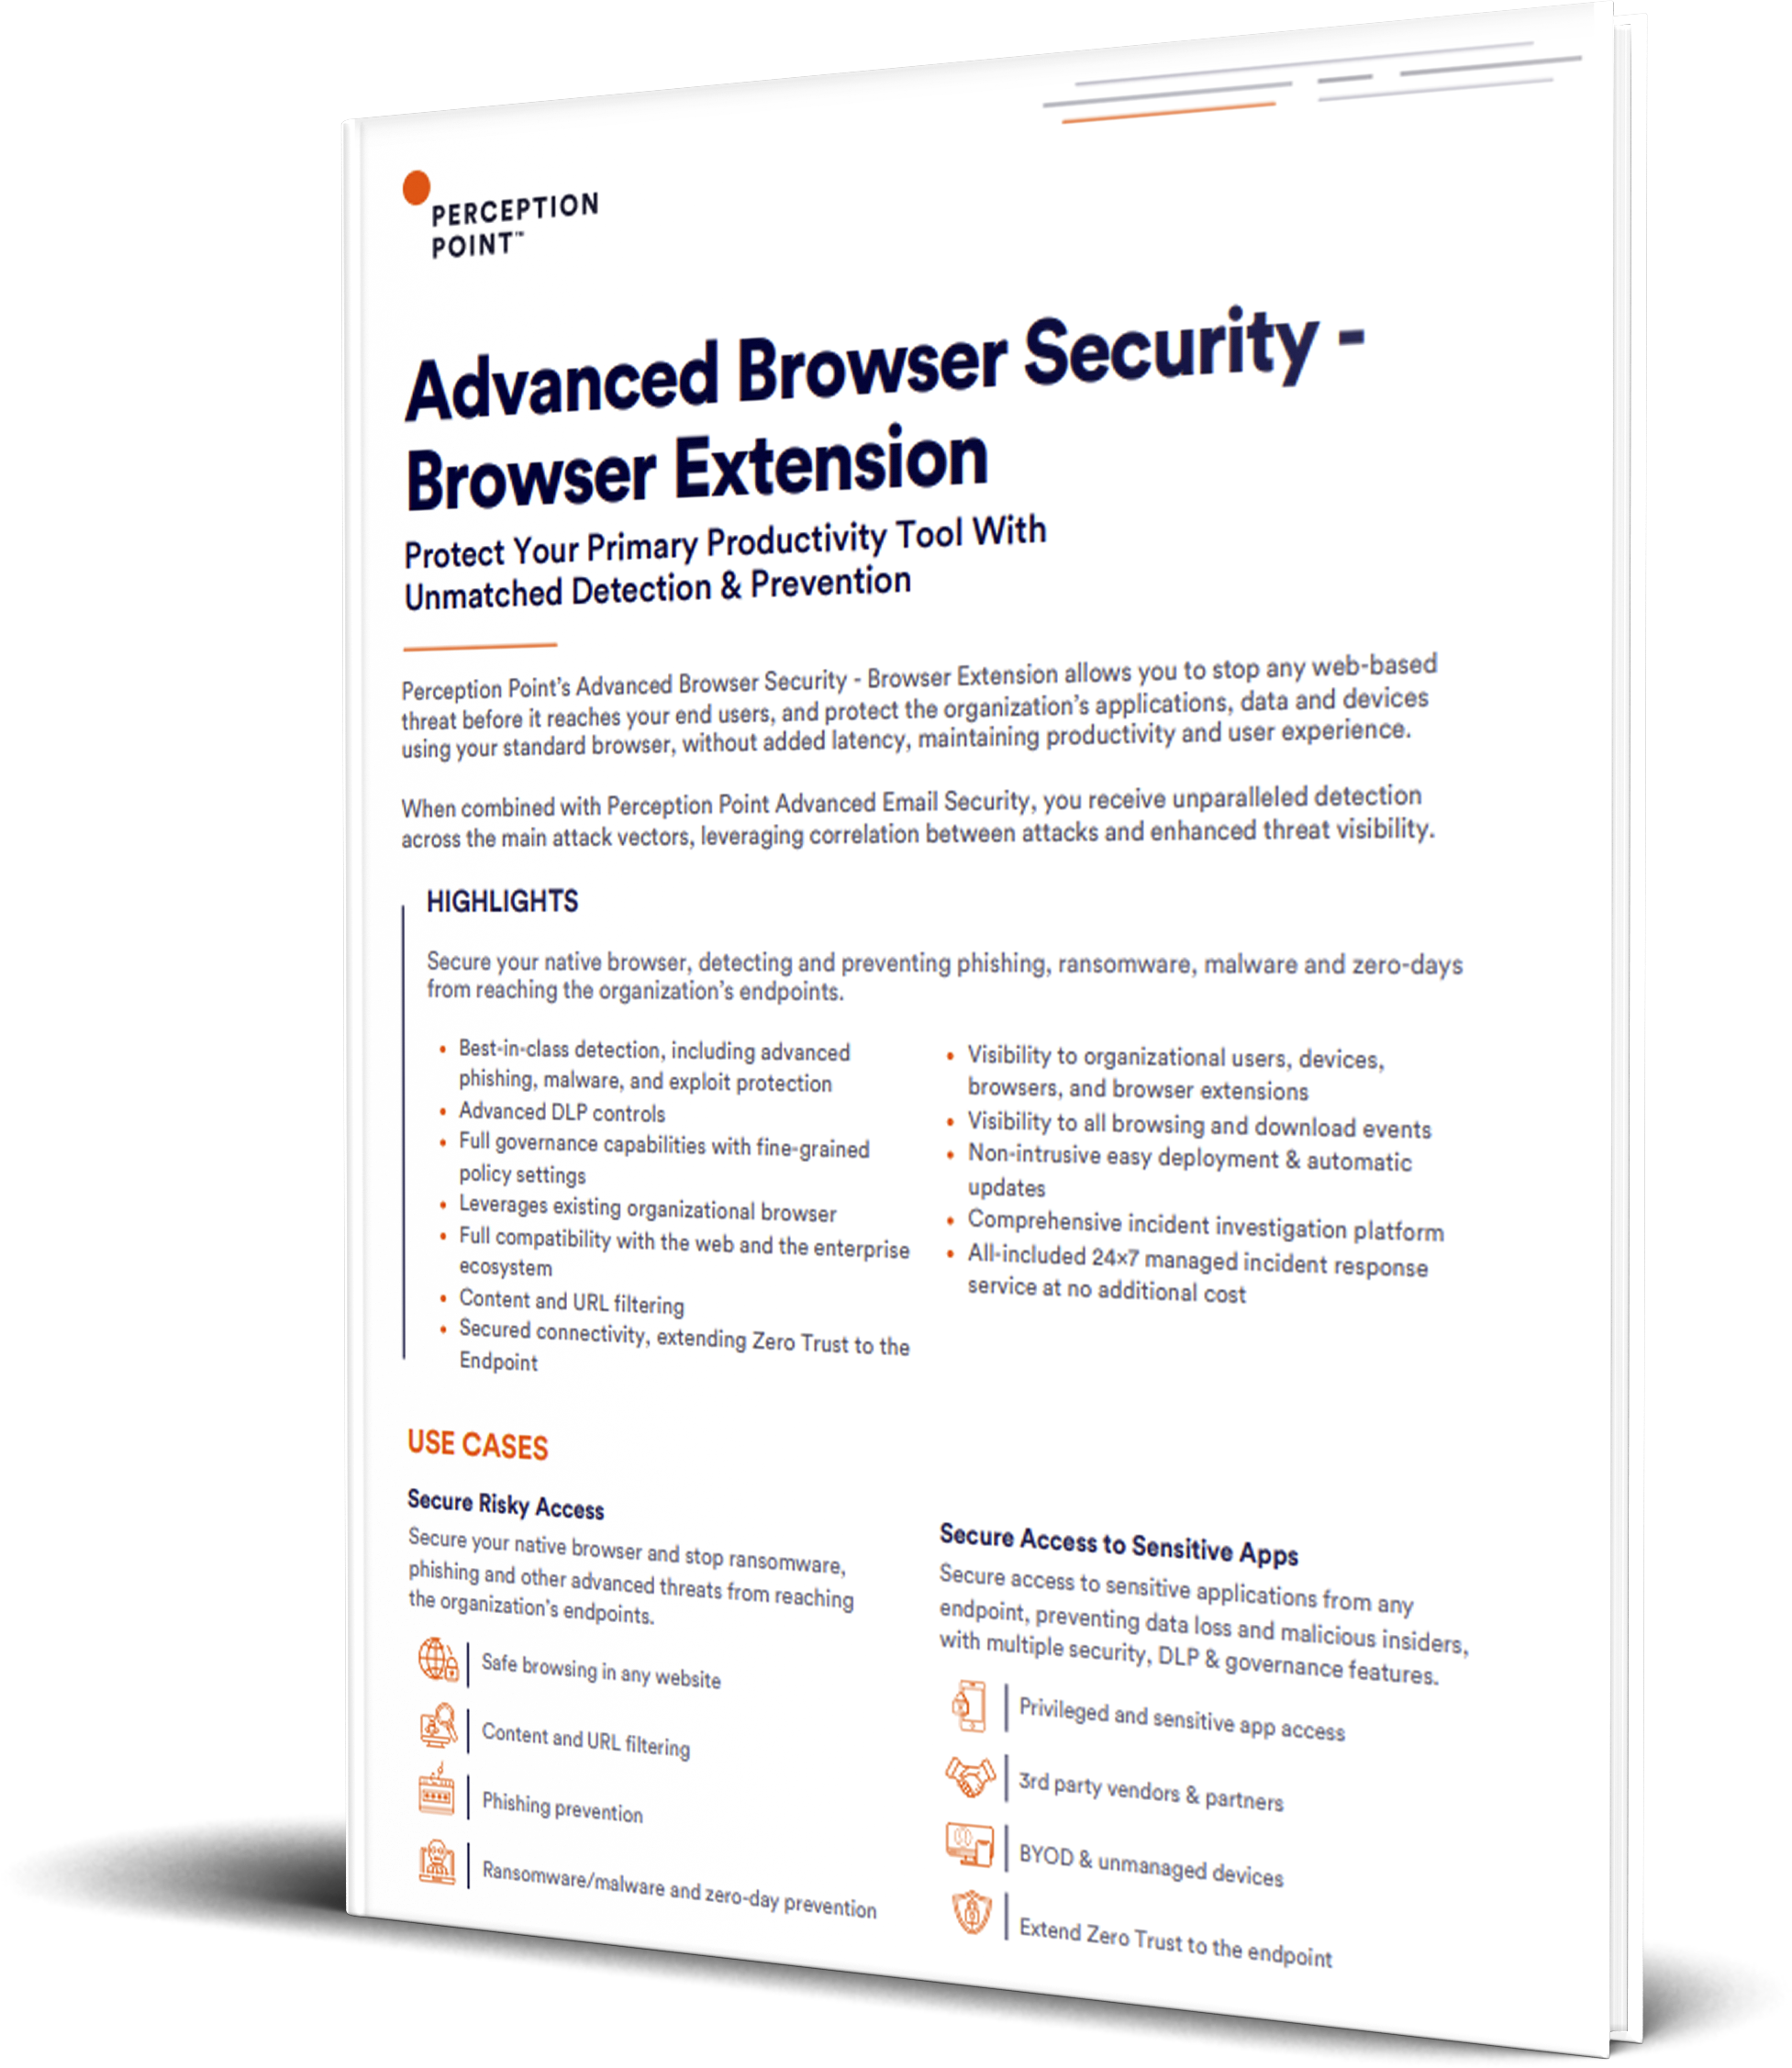 Advanced Browser Security: Browser Extension